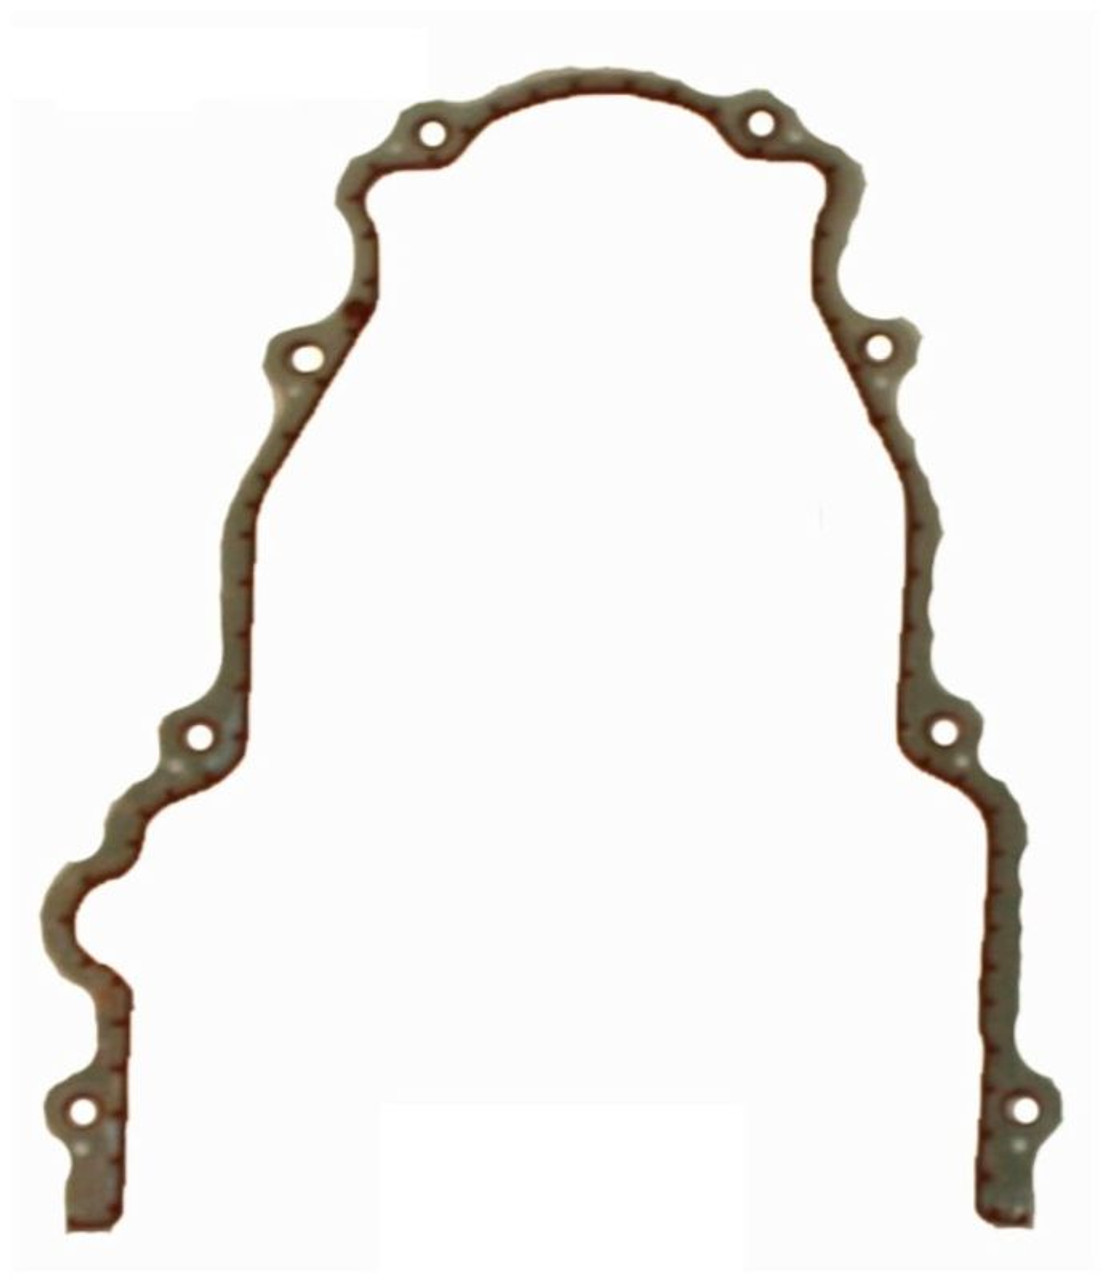 2011 Chevrolet Express 3500 6.0L Engine Timing Cover Gasket TCG293-A -713